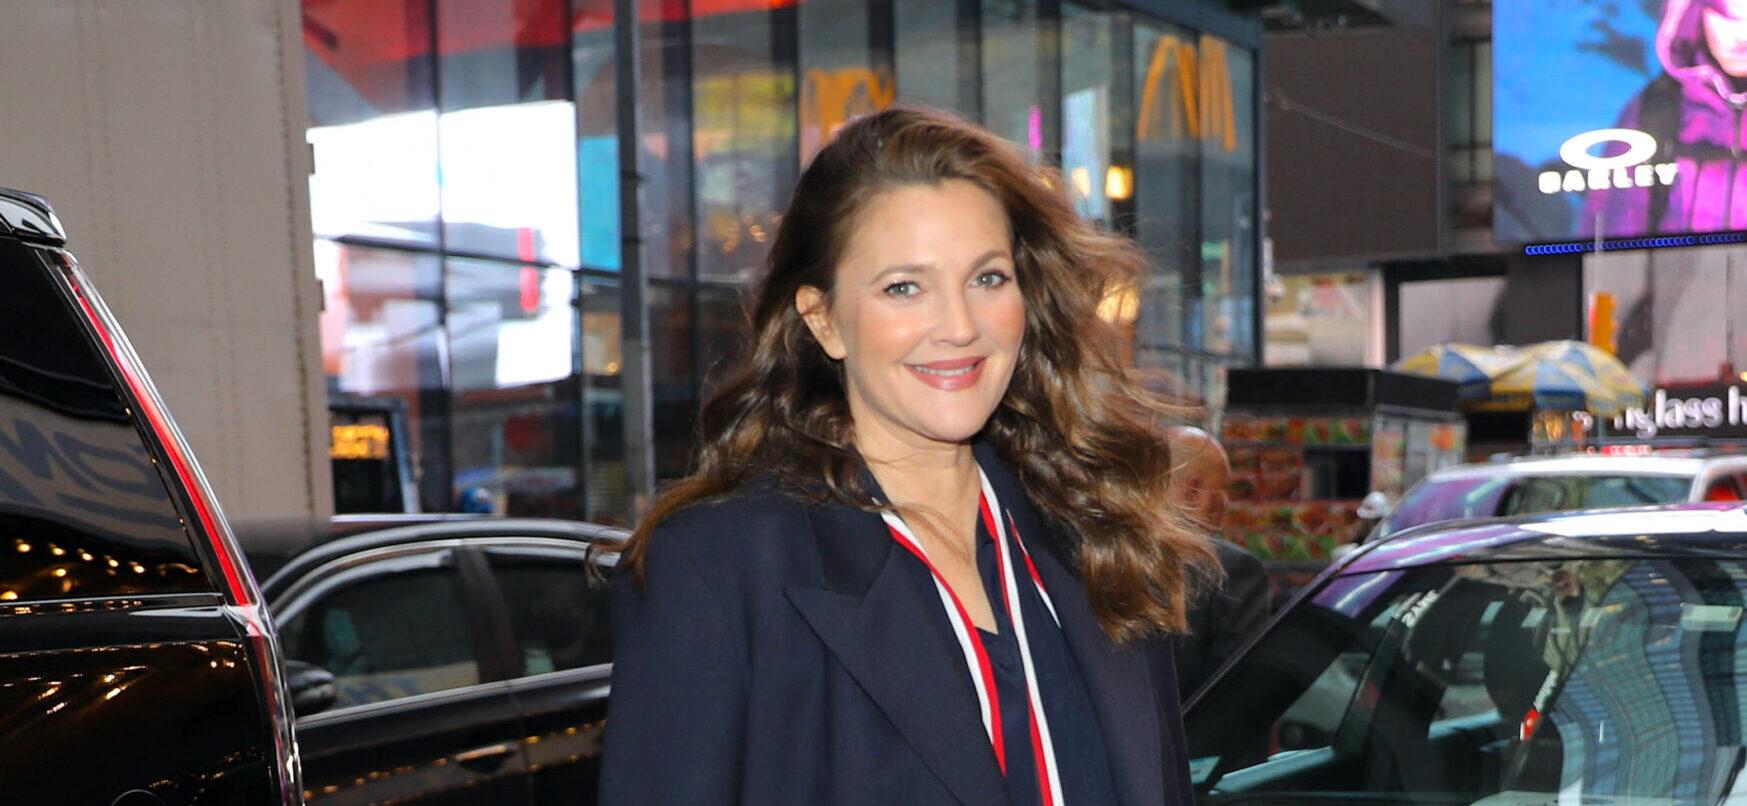 Drew Barrymore Denies Widely Circulated Quote Stating She ‘Wished Her Mother Was Dead’